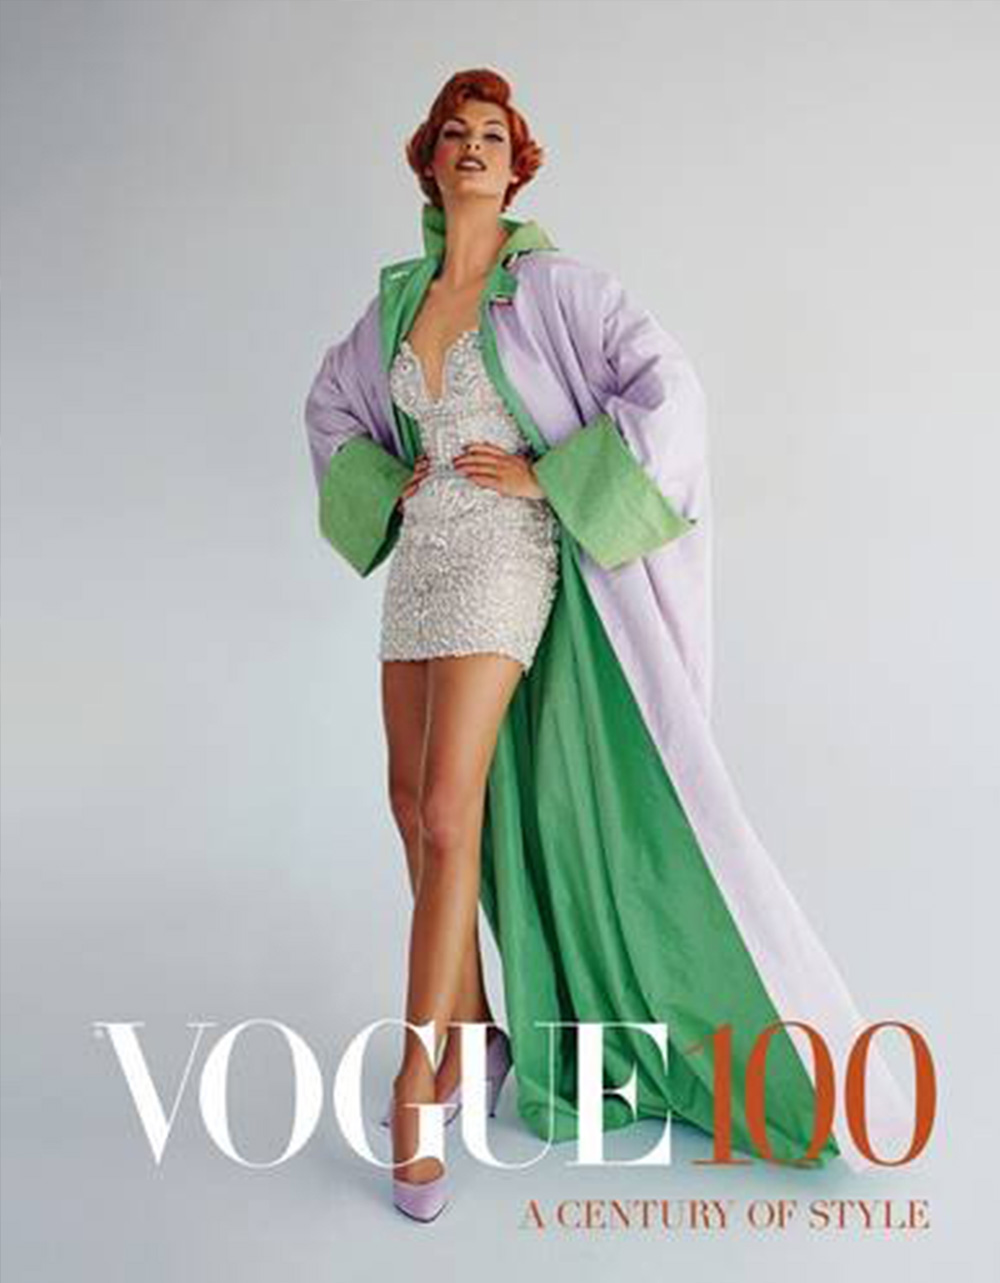 Vogue 100: A Century of Style, by Robin Muir. A selection of the greatest moments in British Vogue’s 100-year publishing history.